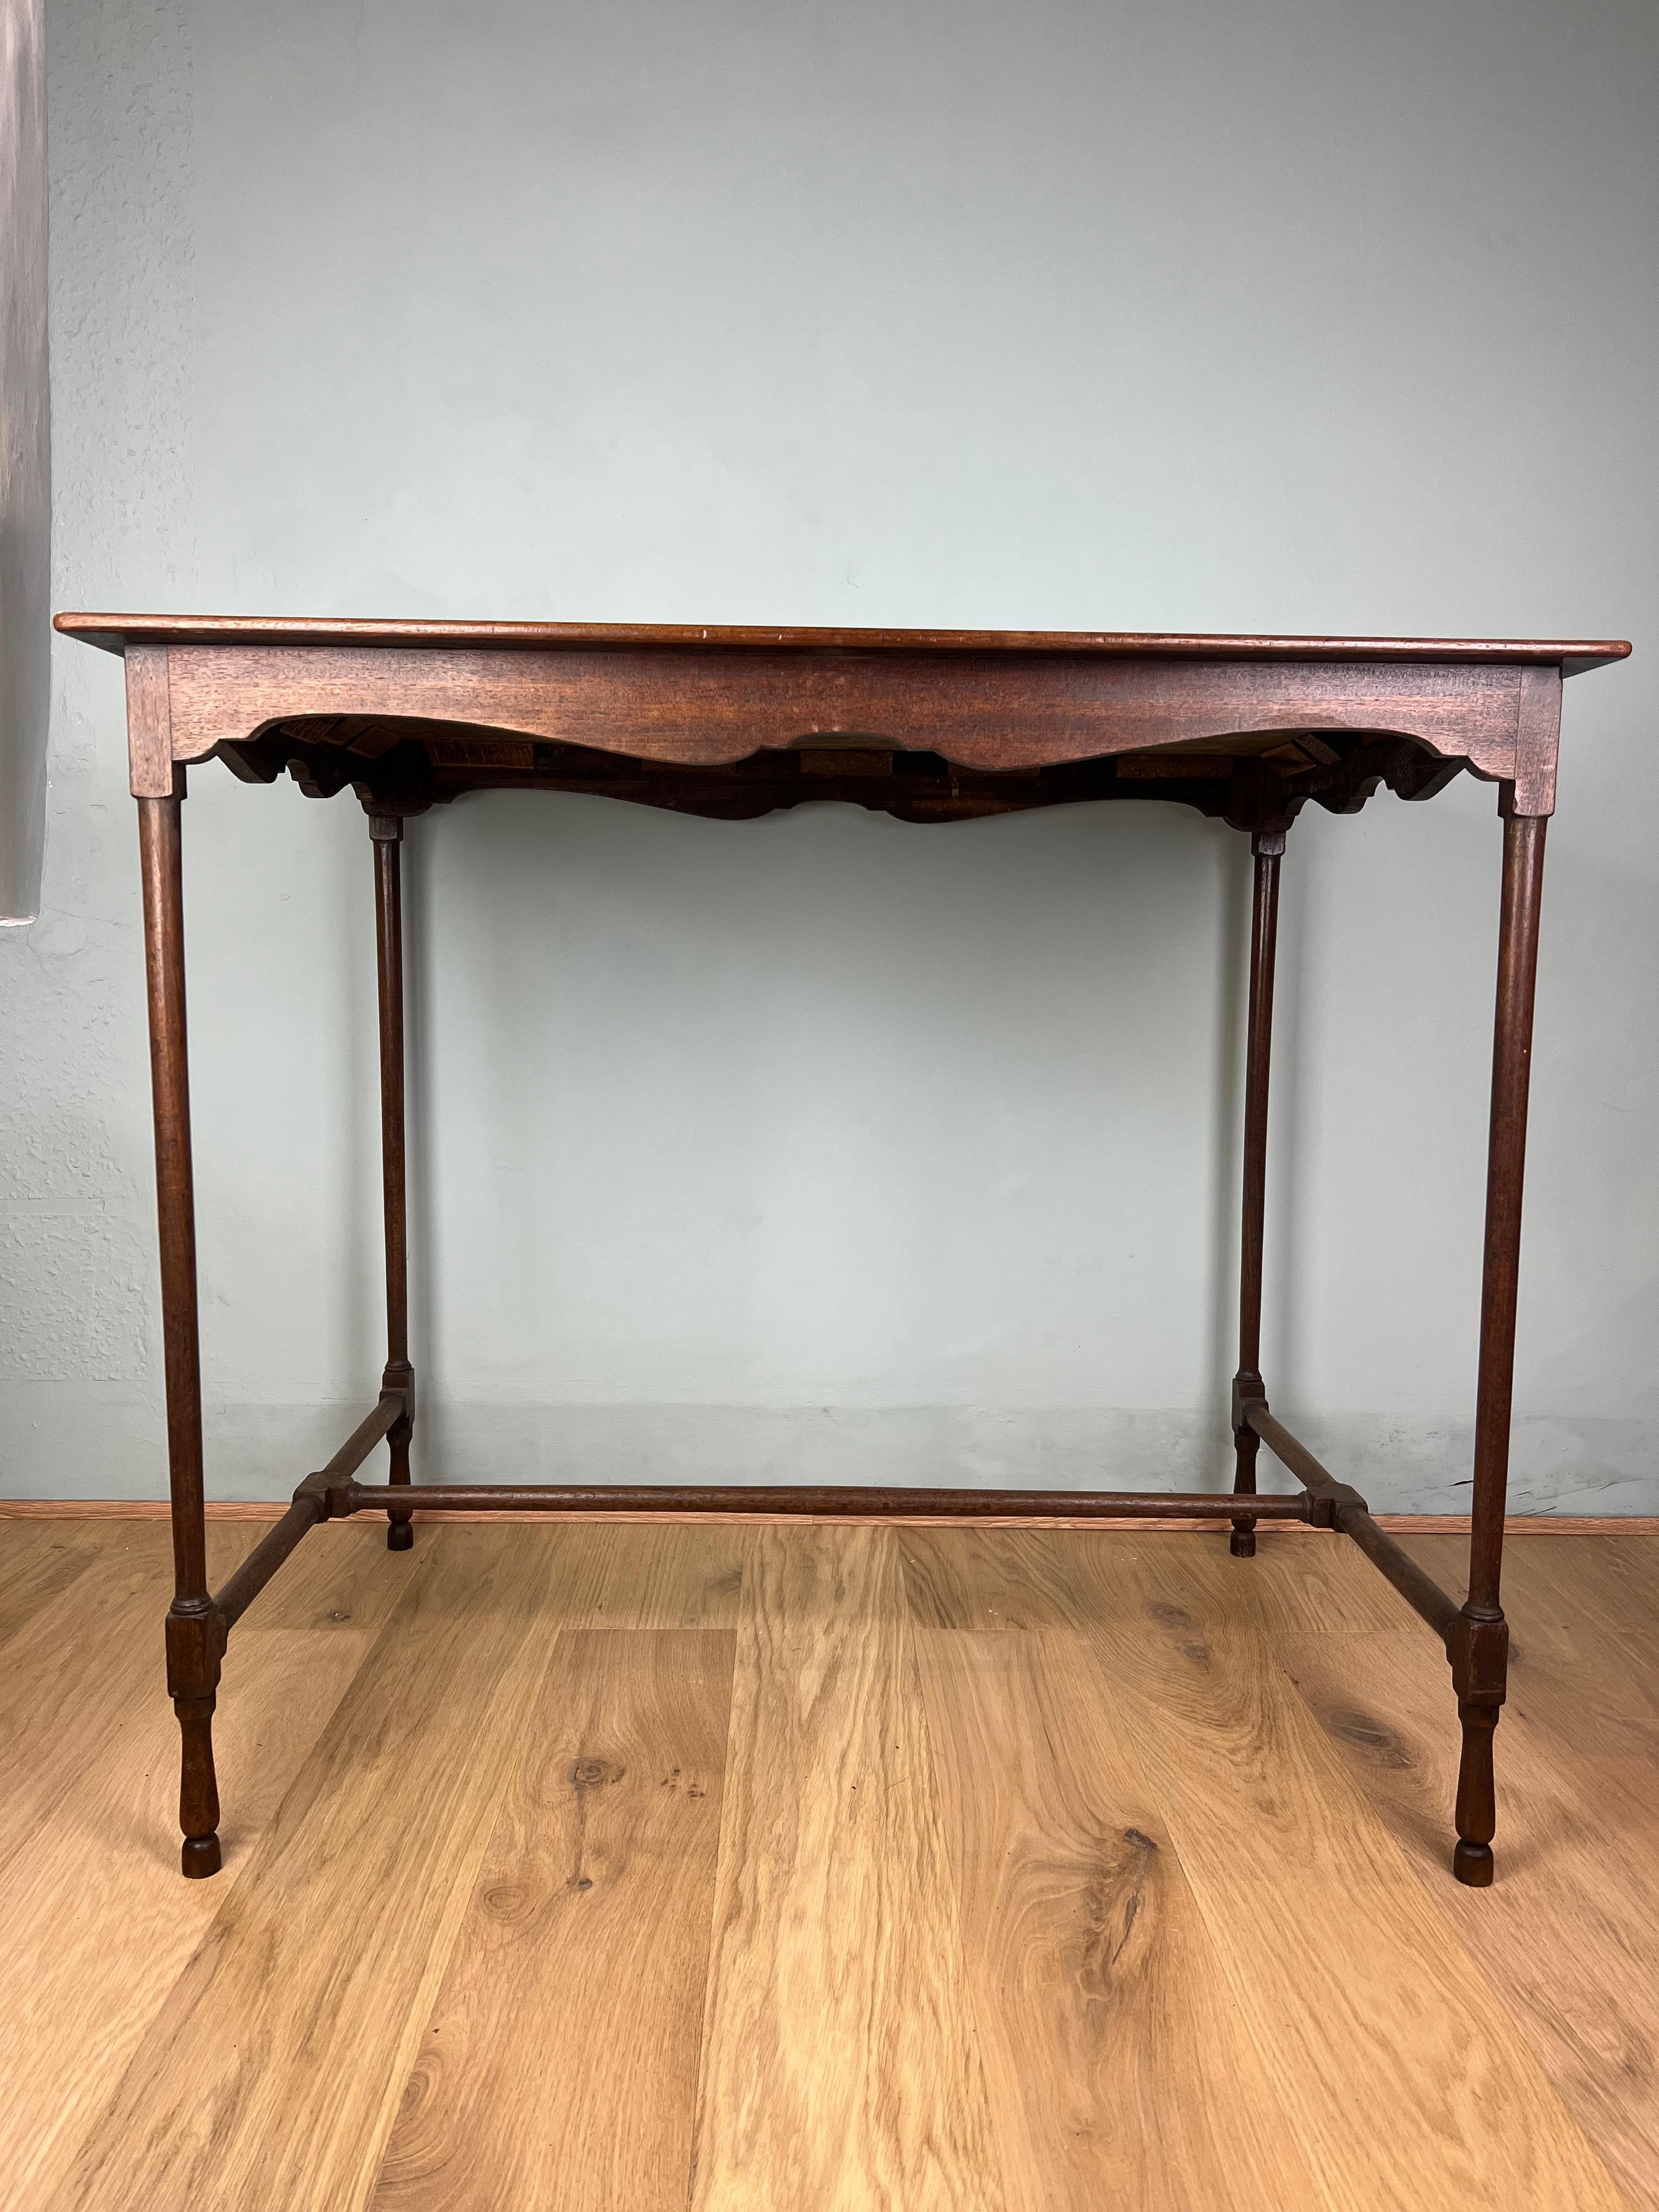 A very fine and delicate George the 3rd mahogany spider table, of good size.
The thin mahogany top is one piece, it is untouched with a wonderful colour and patina, below the top is an attractively shaped frieze, around the circumference of the